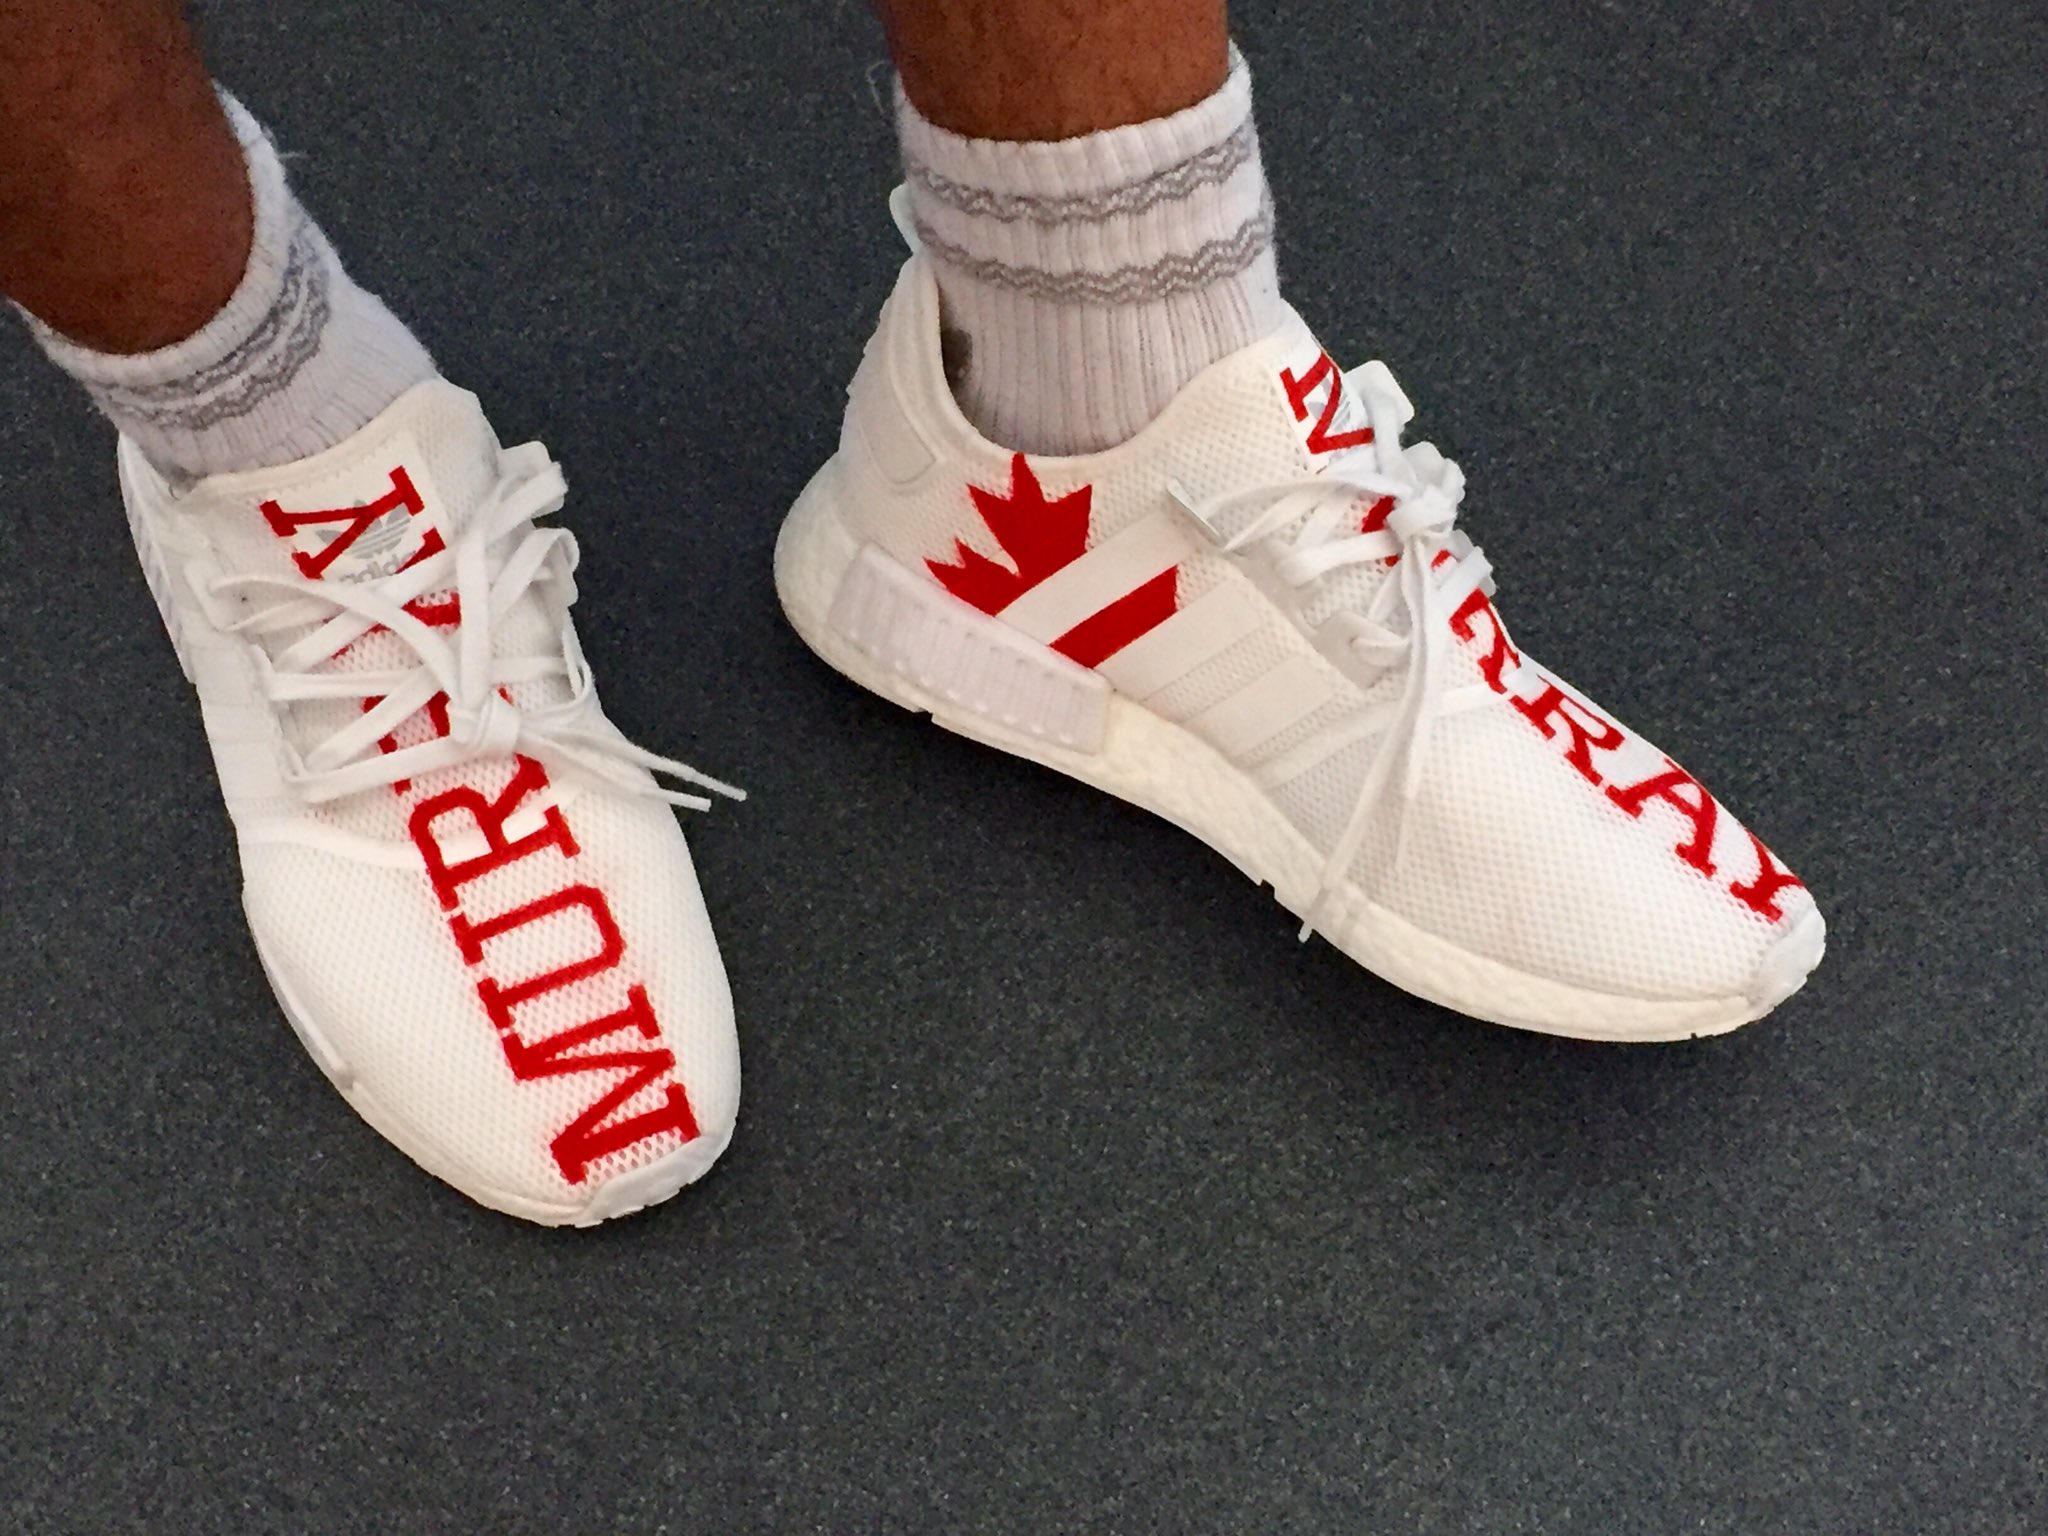 Jamal Murray shows off his new Canadianthemed adidas